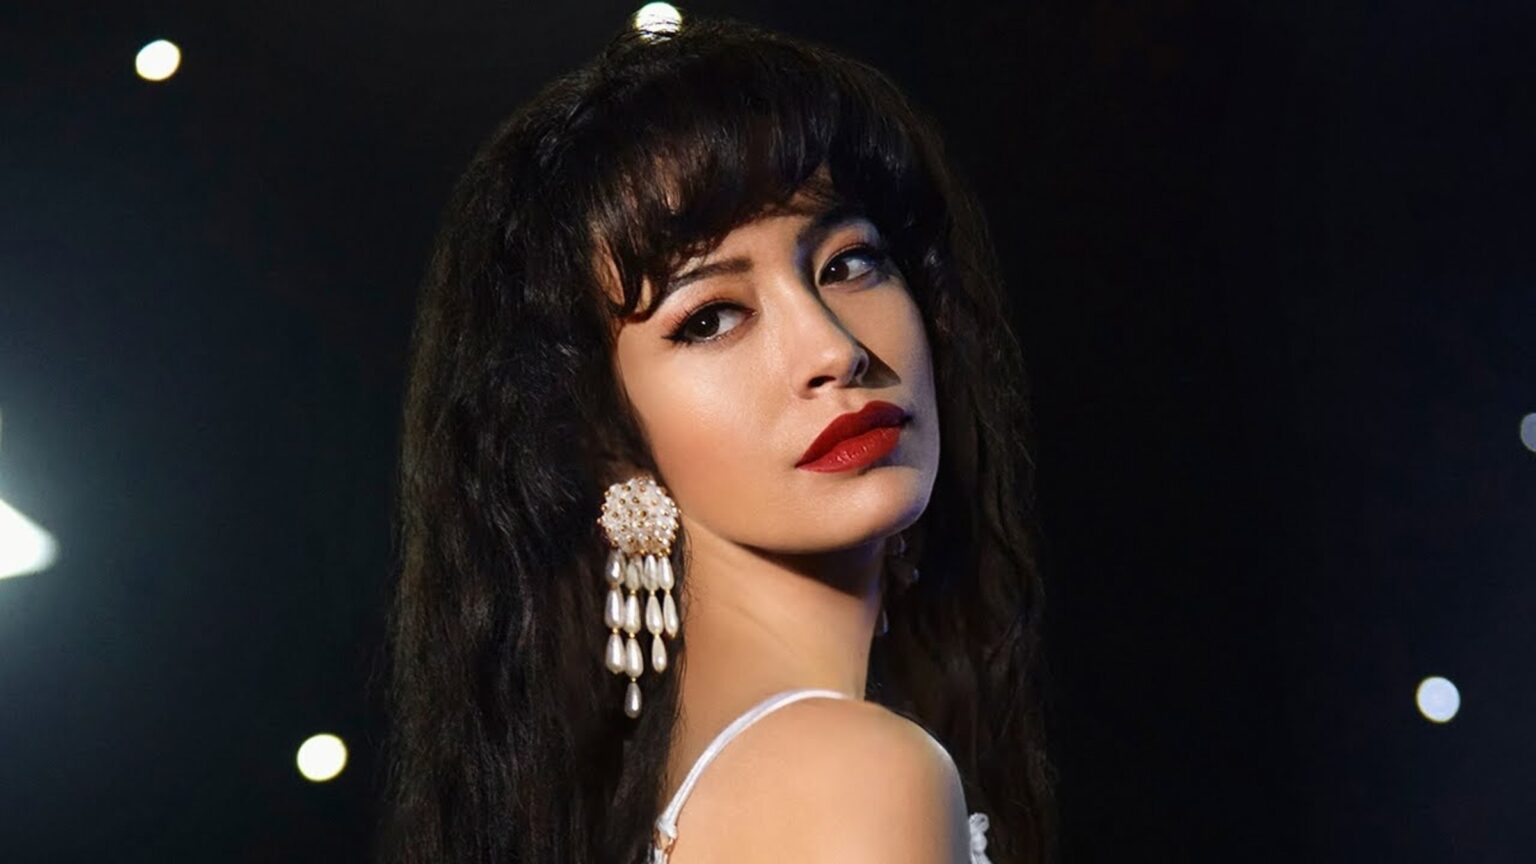 Selena returns! Check out the first trailer for the Netflix series based on the legendary Tejano star.